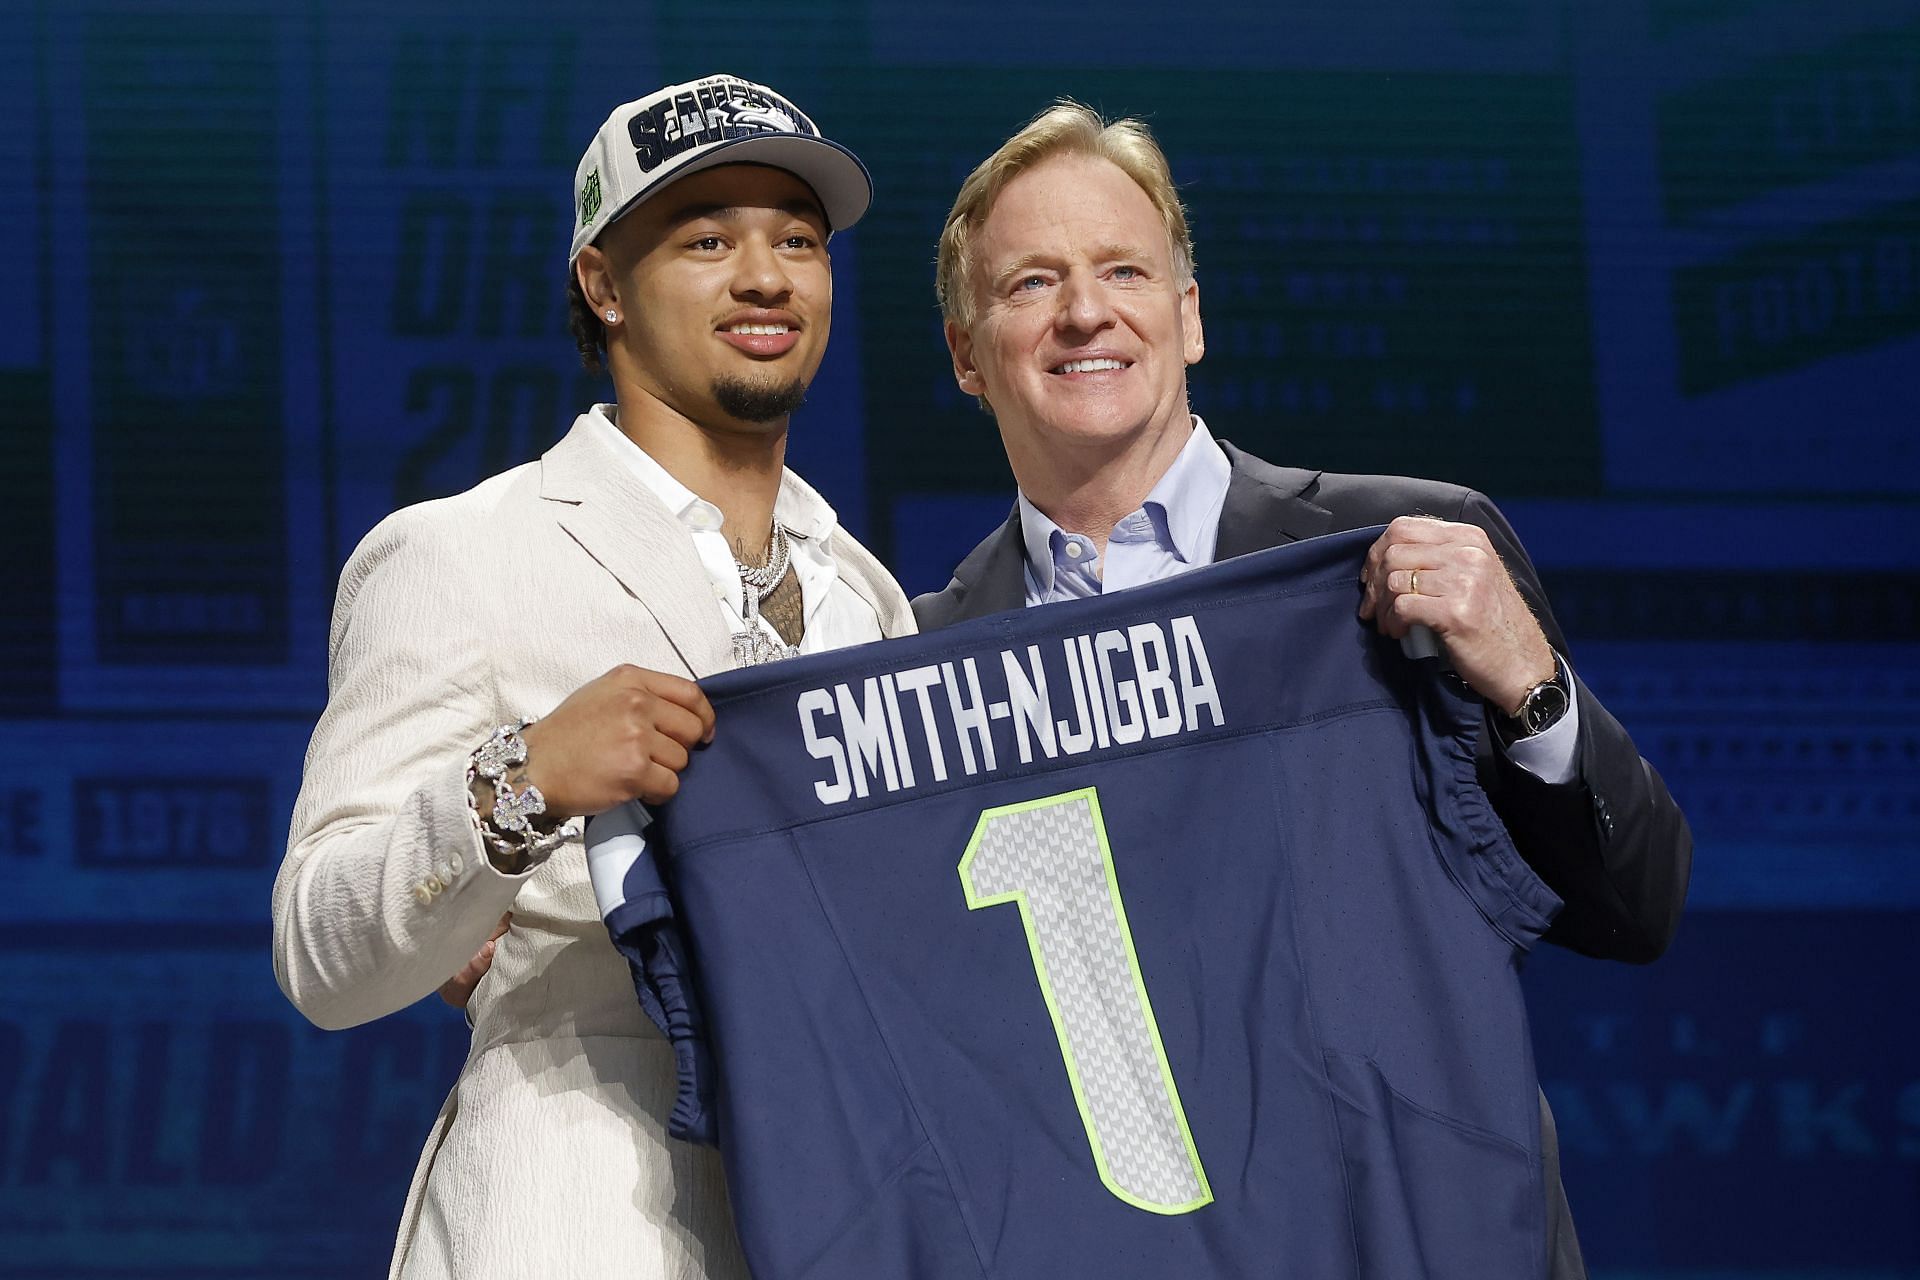 Jaxon Smith-Njigba went in the first round of the NFL Draft